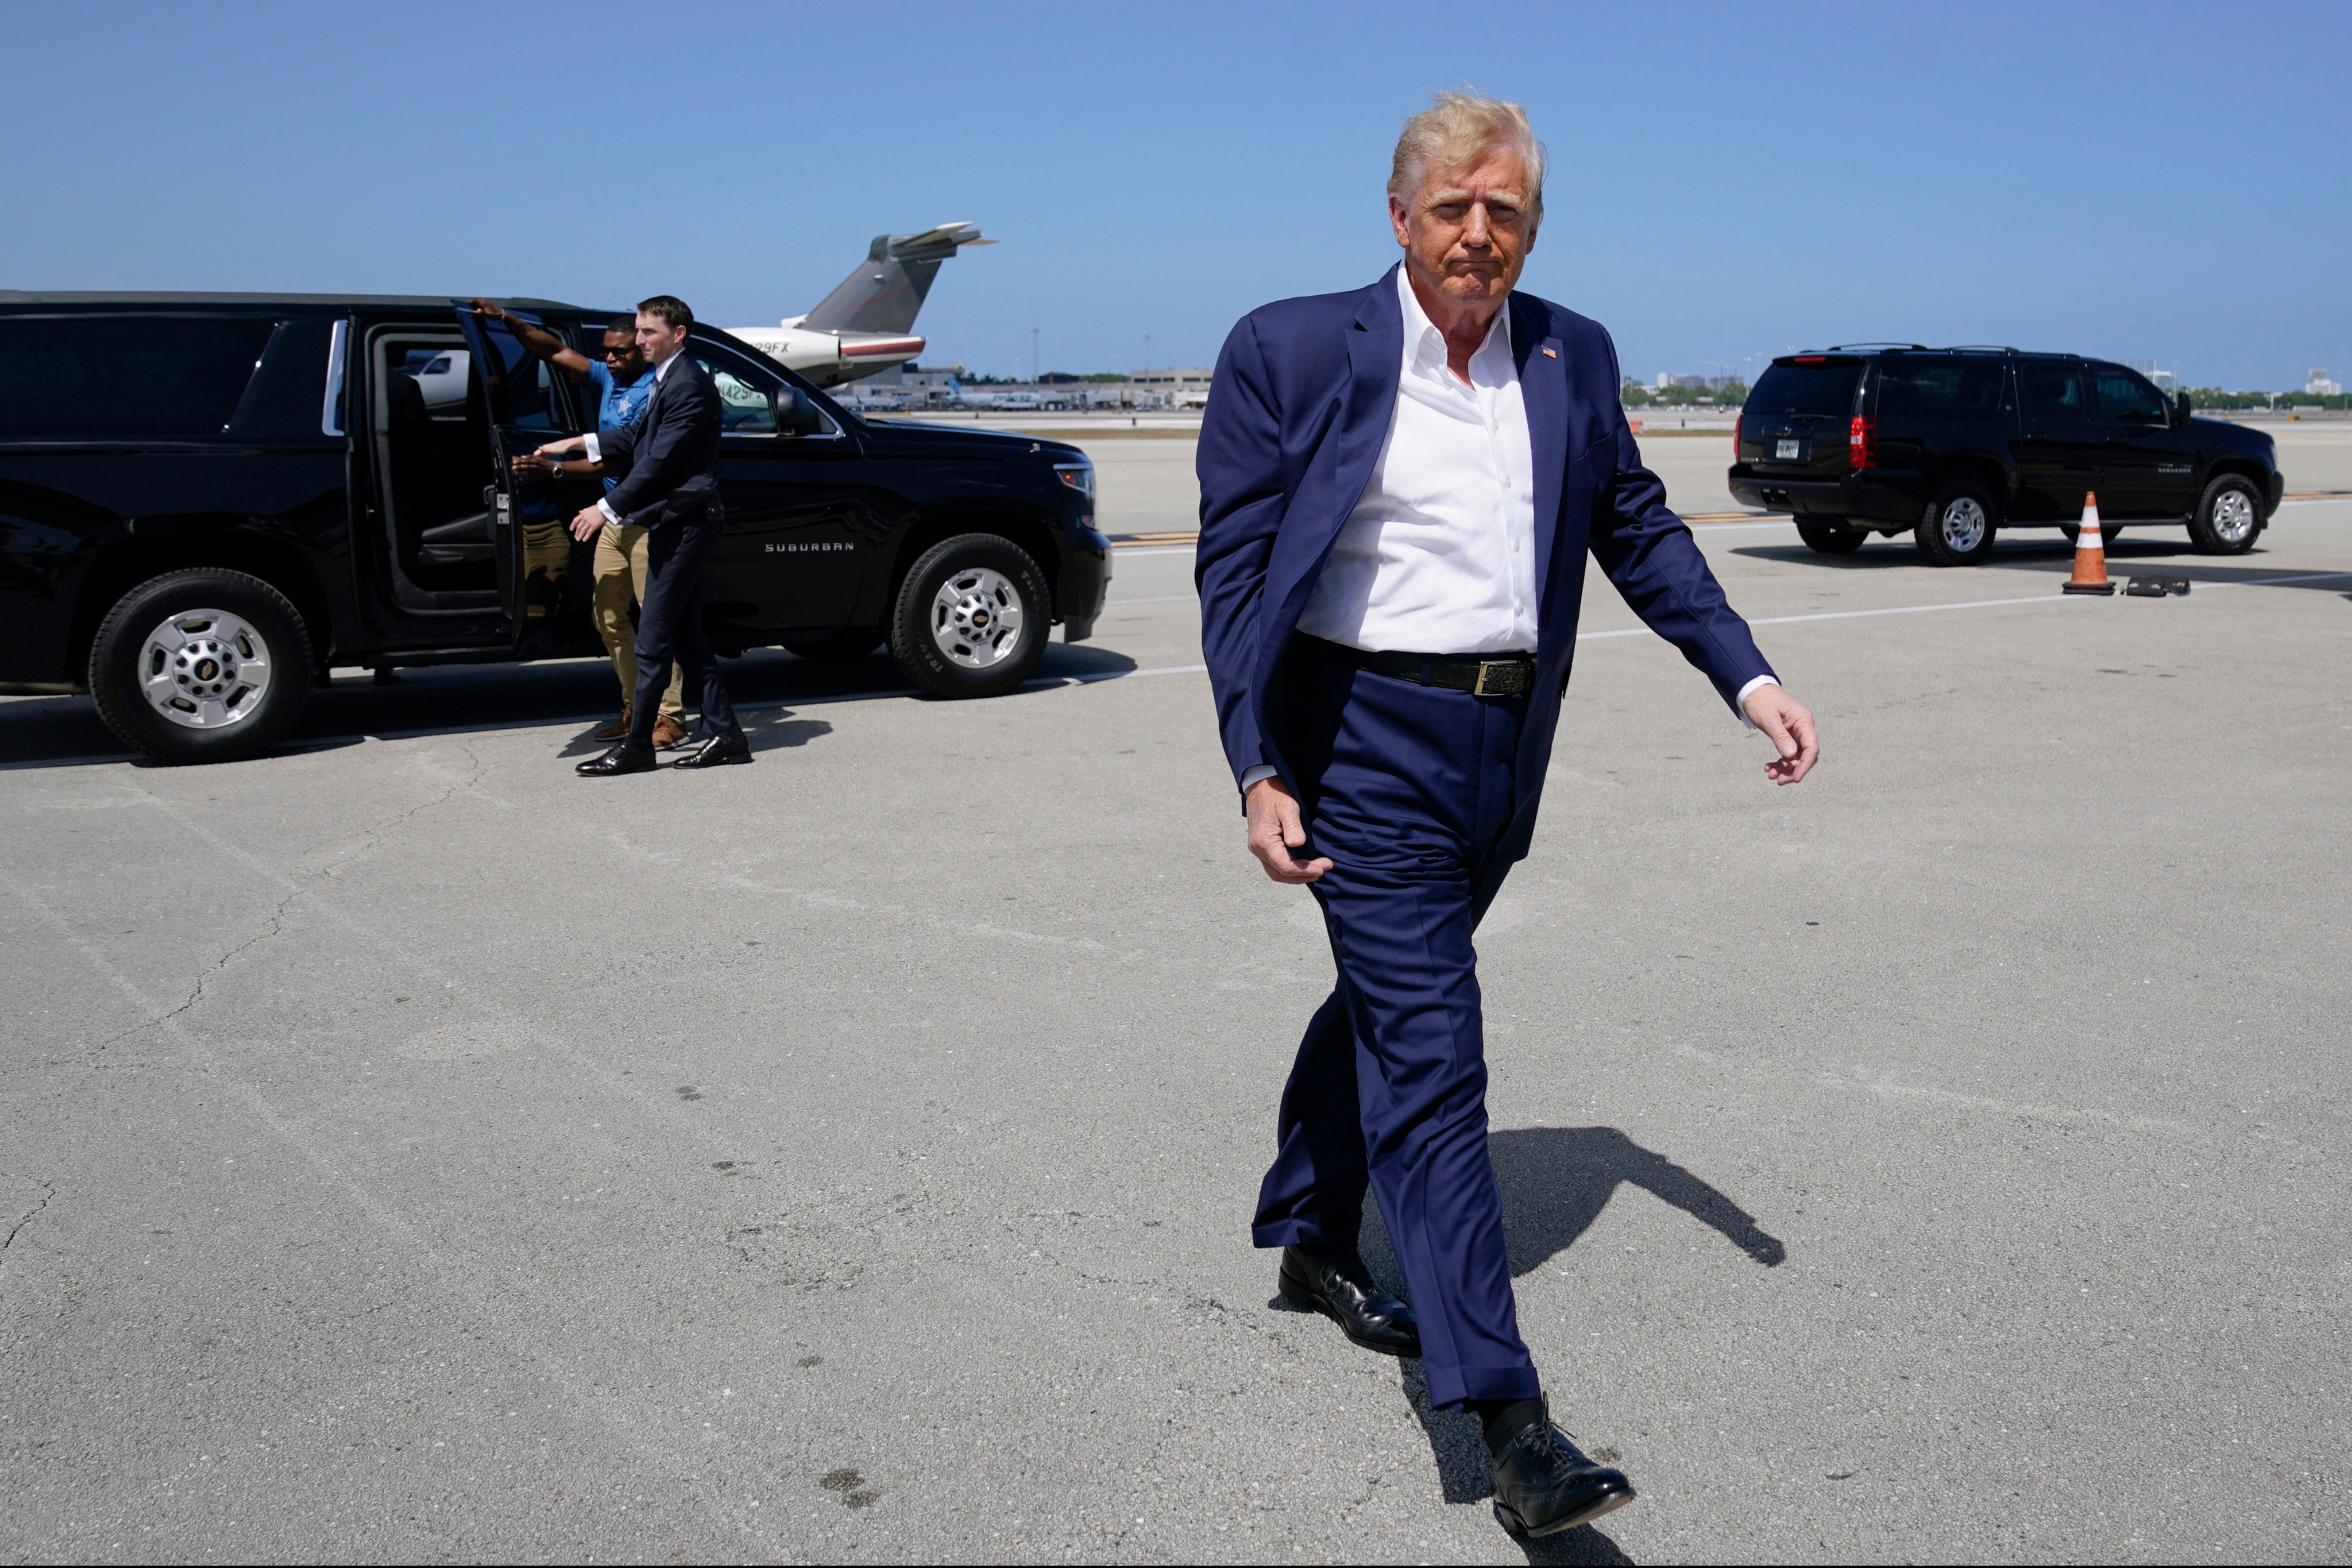 Donald Trump walks to board his airplane for a trip to a campaign rally in Waco, Texas, at West Palm Beach International Airport on March 25 in Florida. Photo: AP